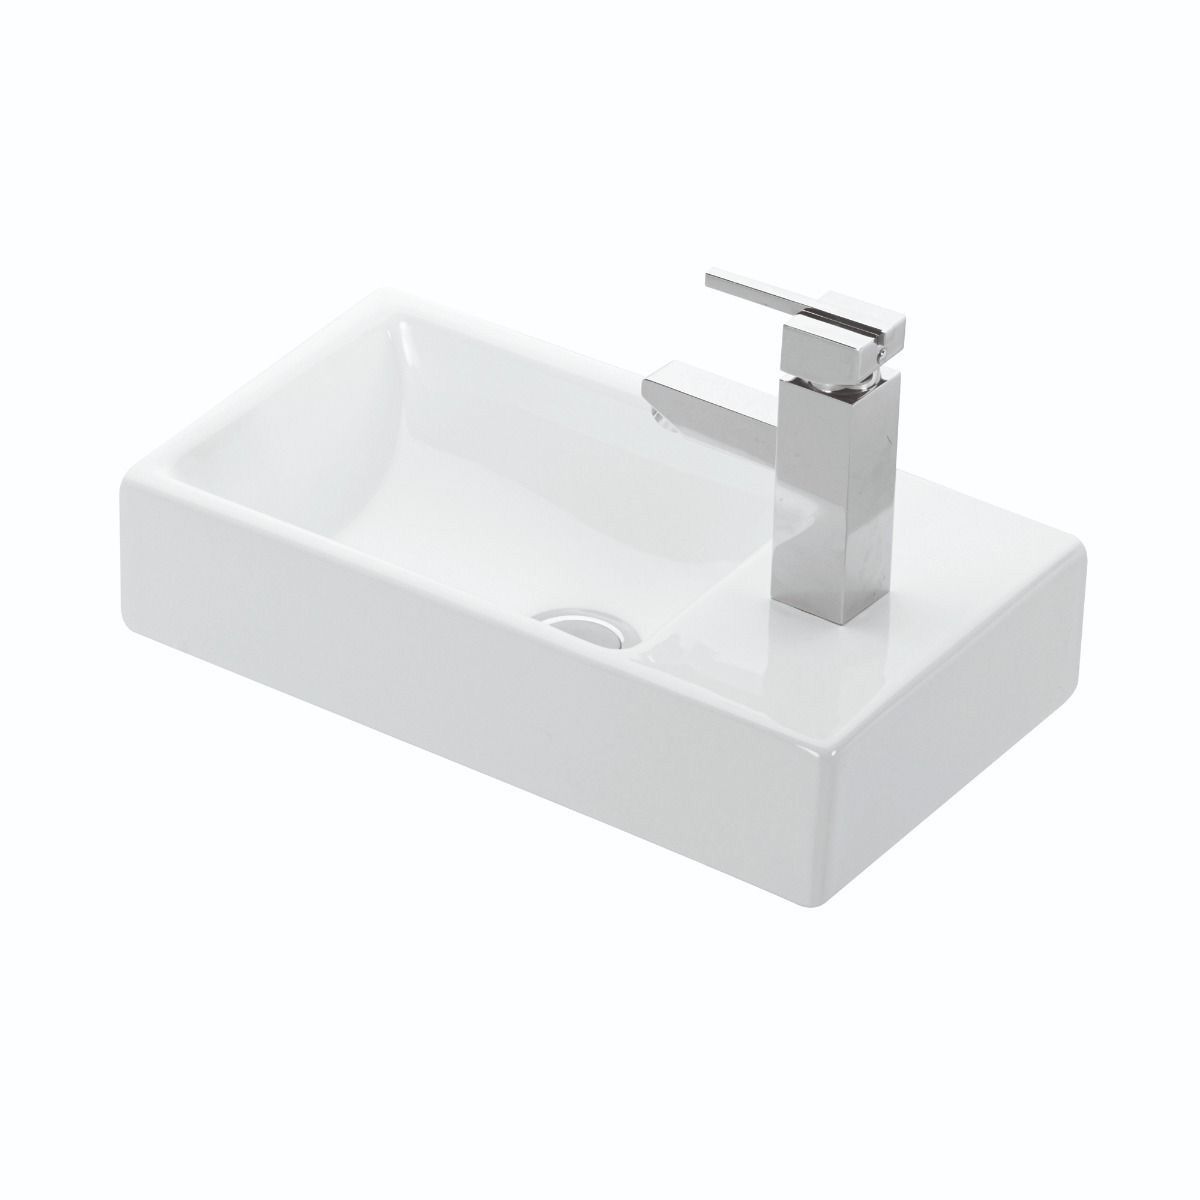 WS BATH COLLECTIONS MINIMAL 4057 17 7/8 INCH WALL MOUNT OR VESSEL BATHROOM SINK - CERAMIC WHITE